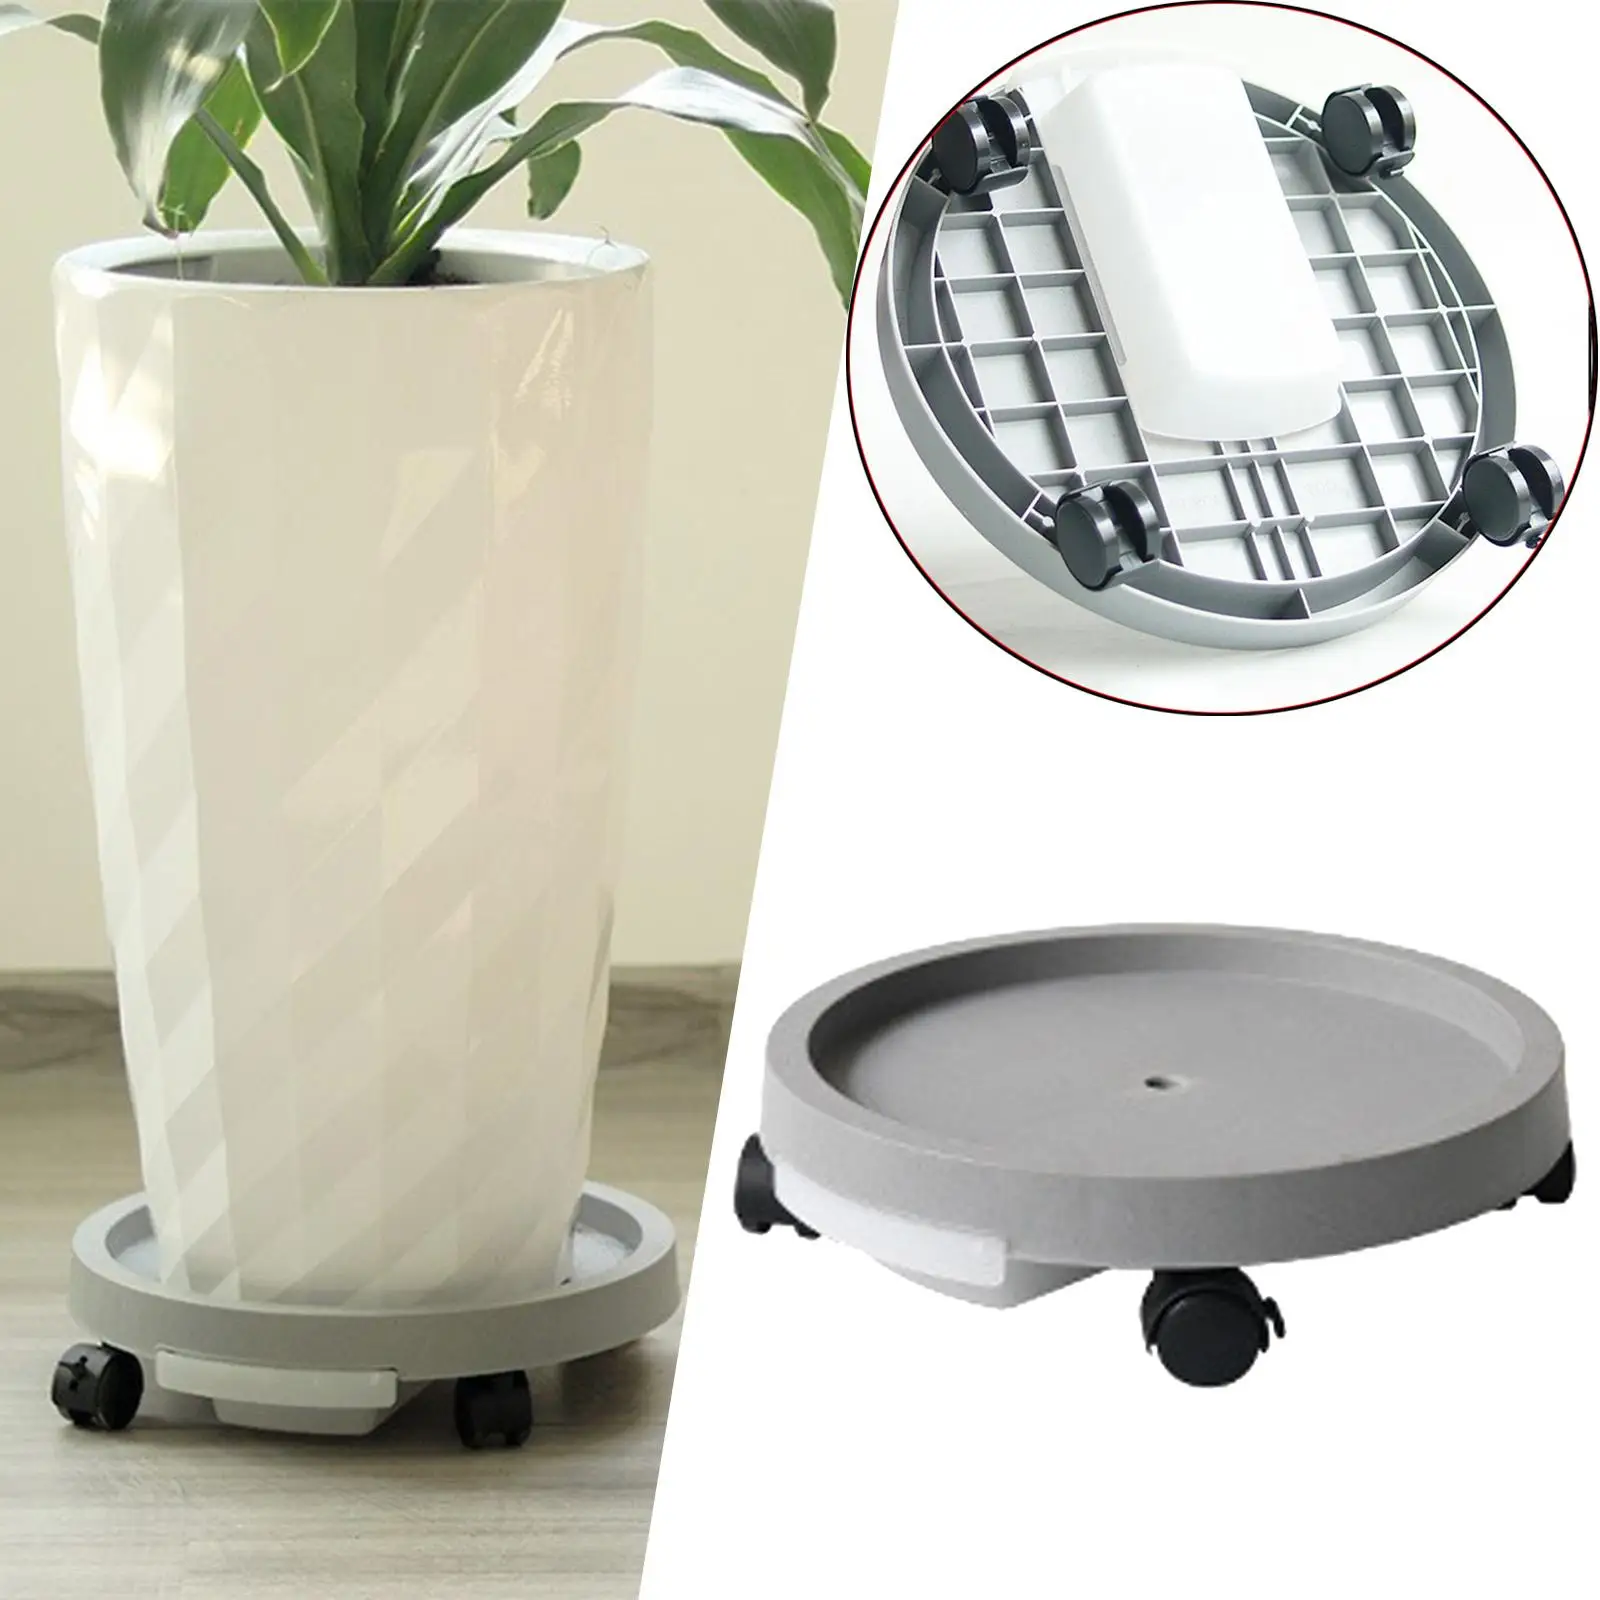 Movable Flower Pots Tray with Universal Wheels Caddy Mover Round Planter Caddy High Bearing for Garden Outdoor Office Shop Gifts